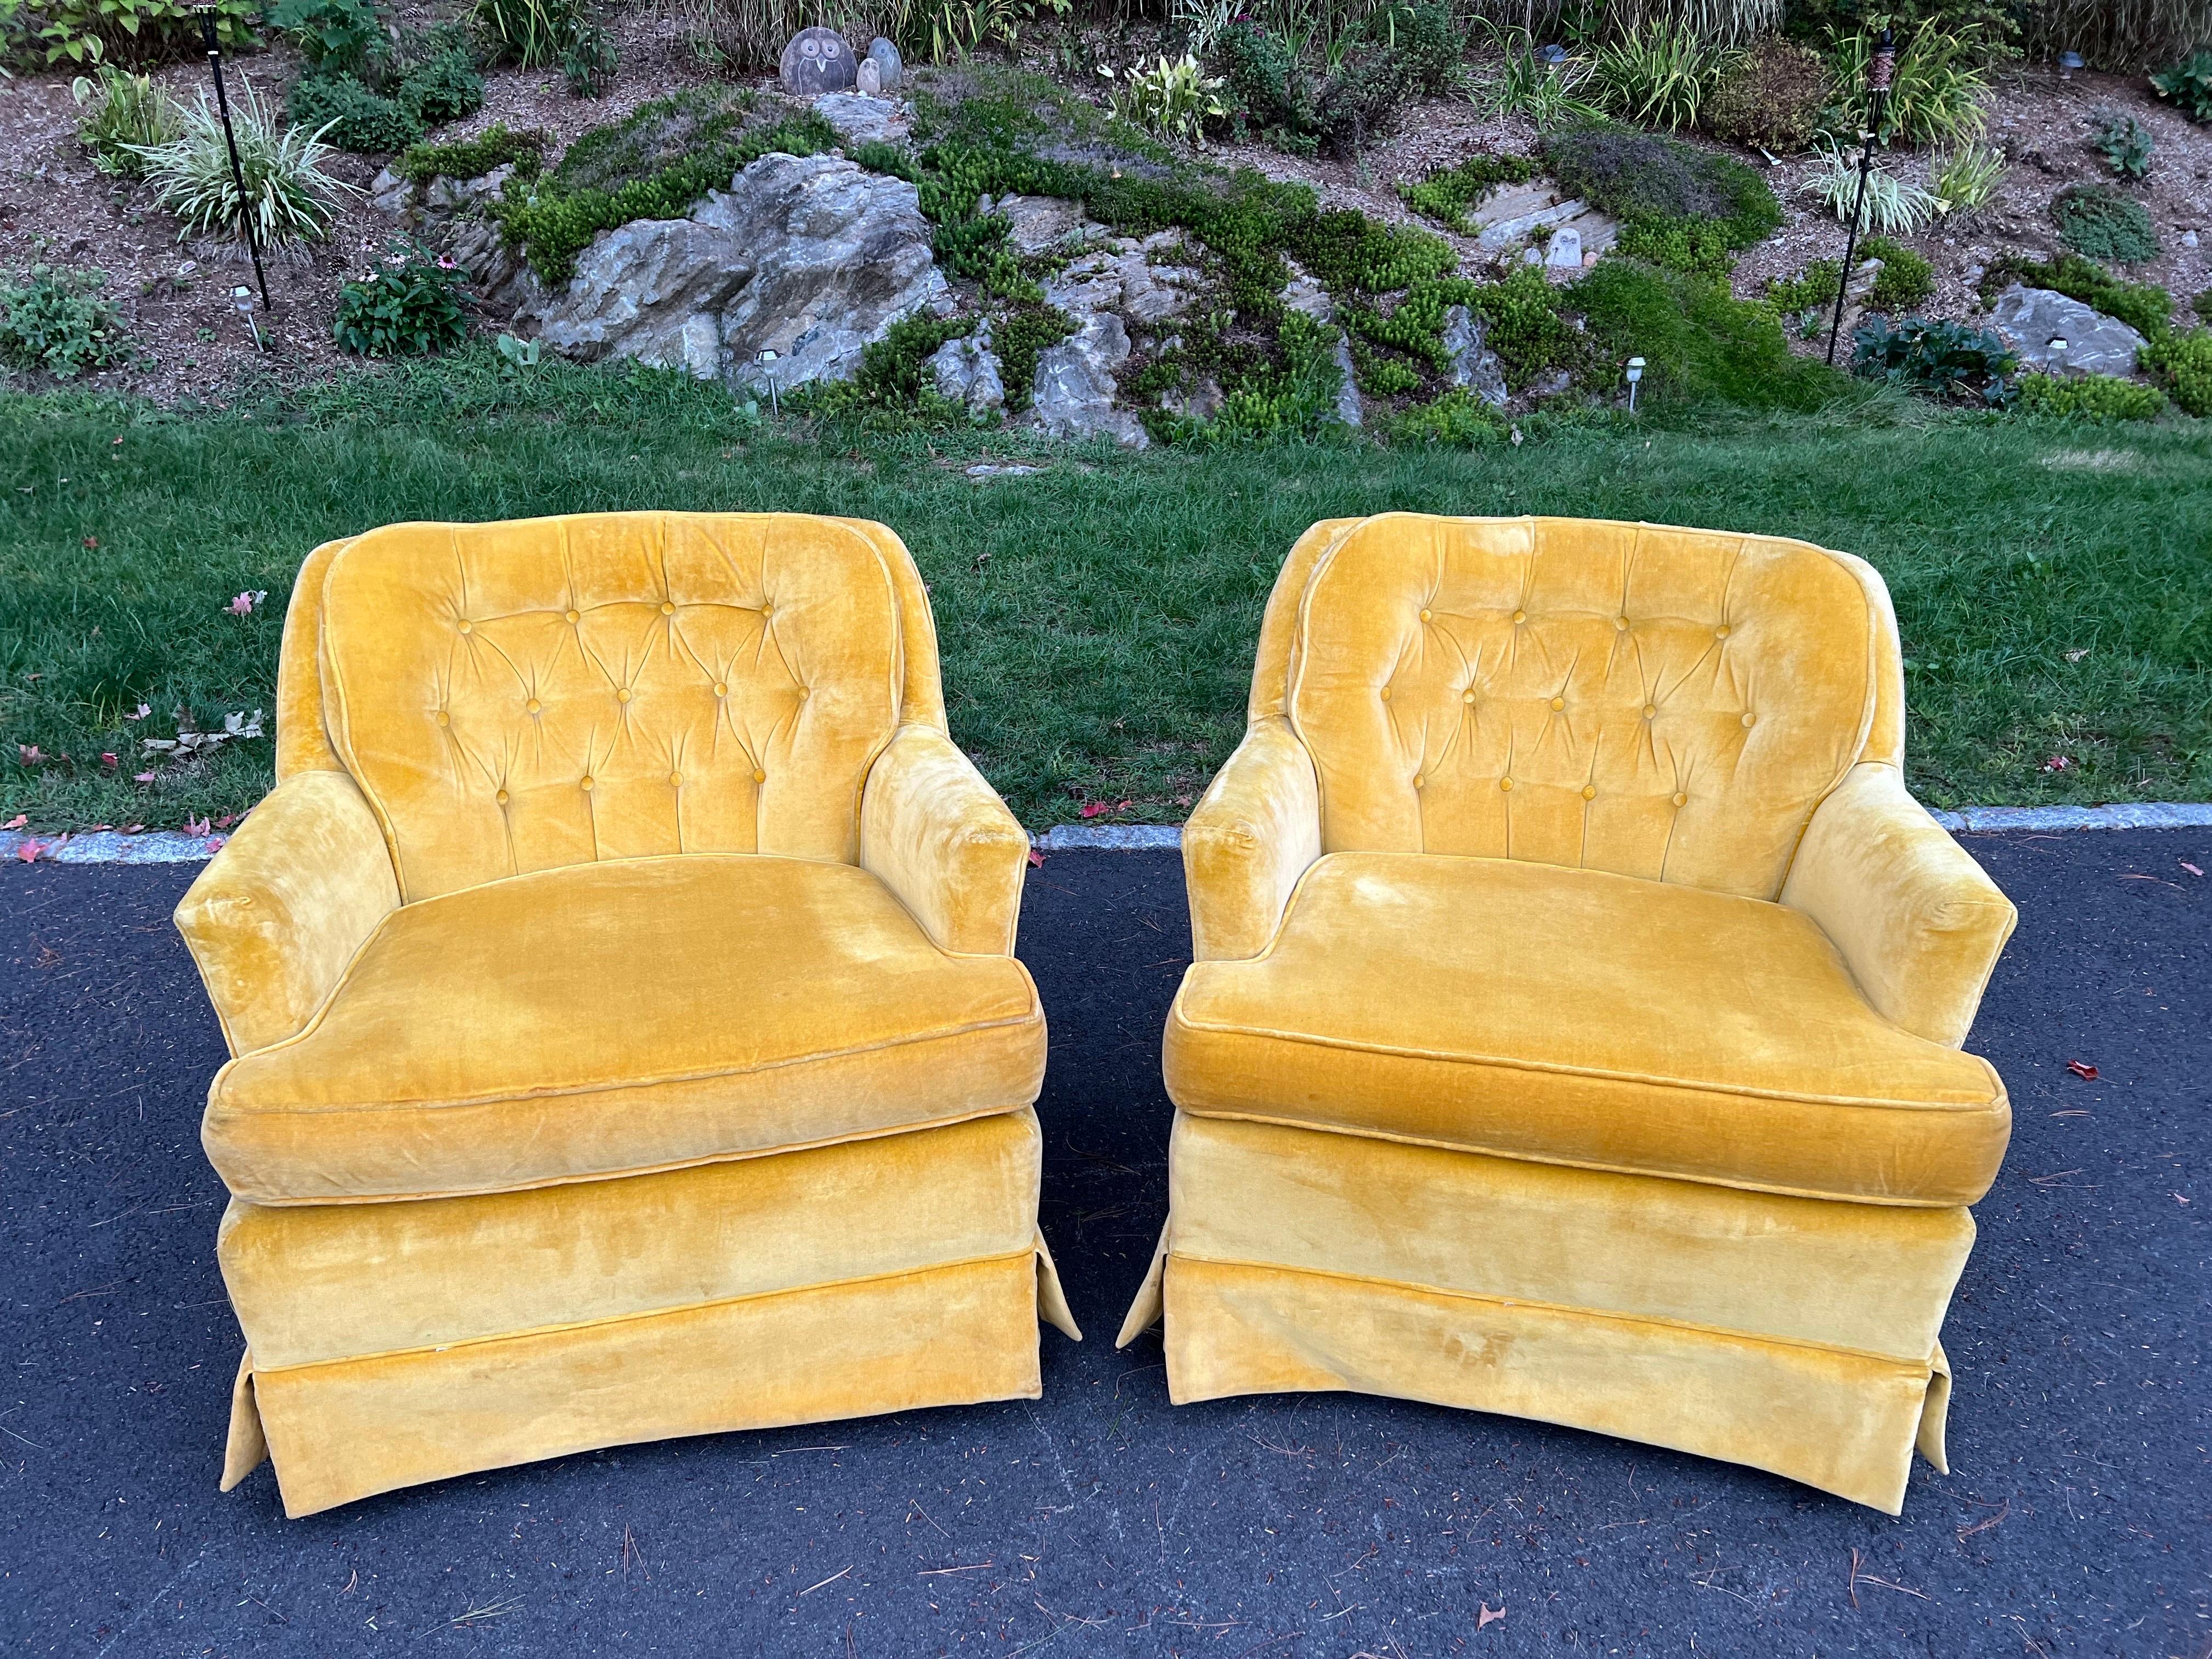 Pair of Mustard Yellow velvet club chairs. Made by Arcadian Furniture out of Conover, North Carolina . Which has been in business since 1966. Classic shape and style with a skirted /pleated base on four wooden legs.
   